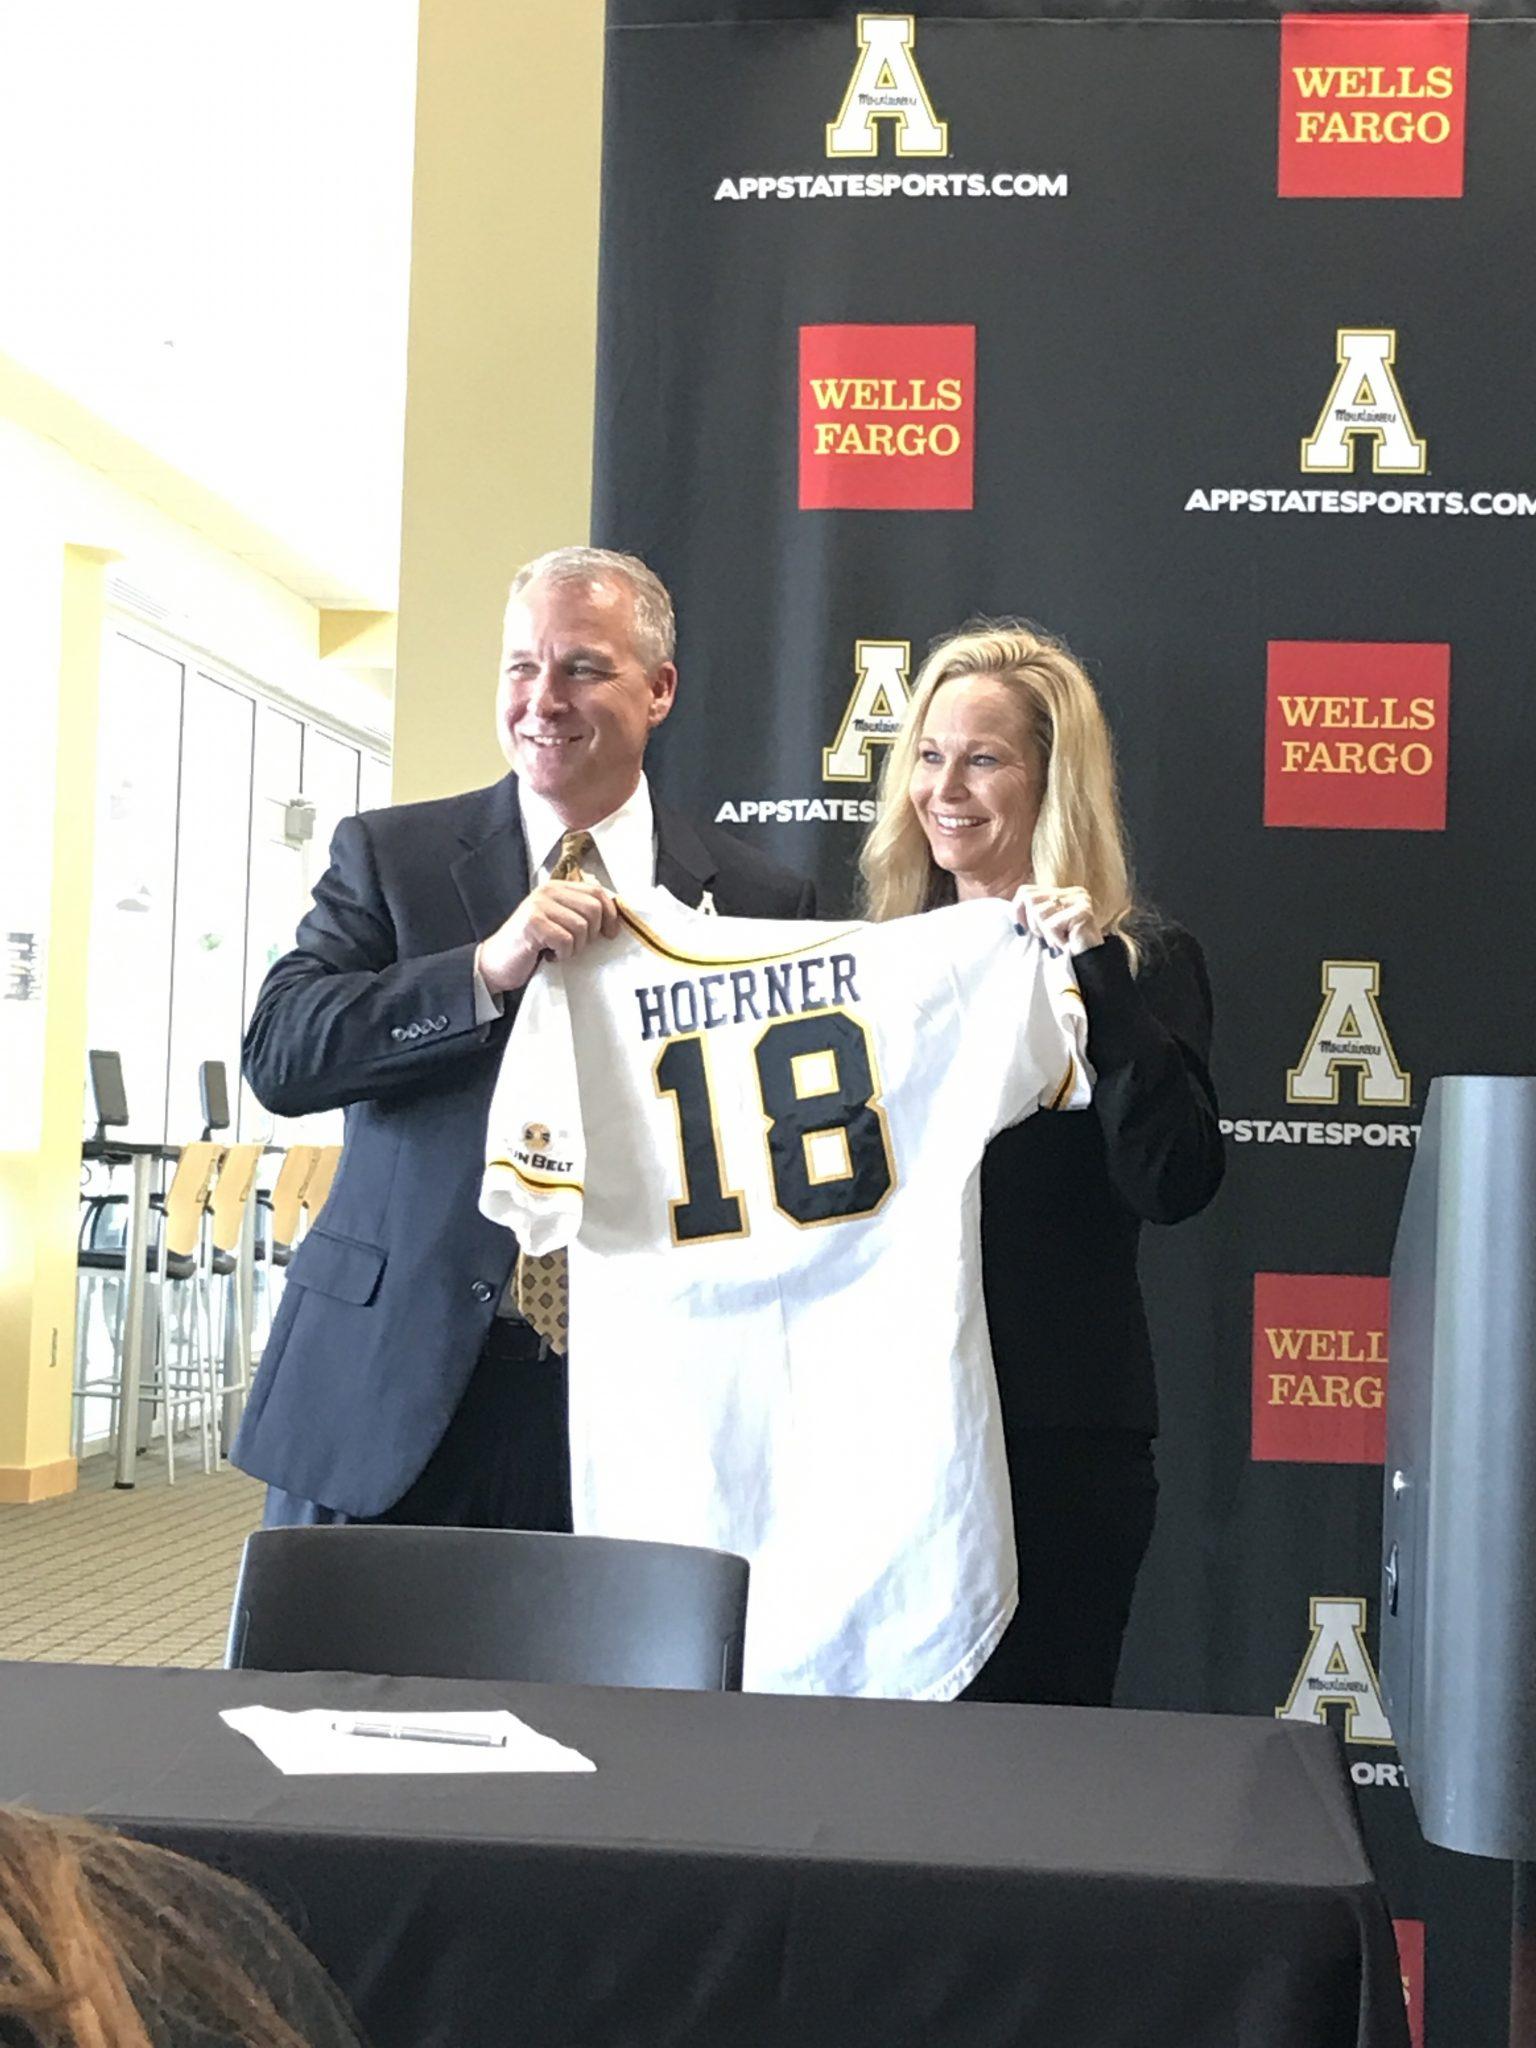 App State athletics director Doug Gillin introduces new softball coach Shelly Hoerner 